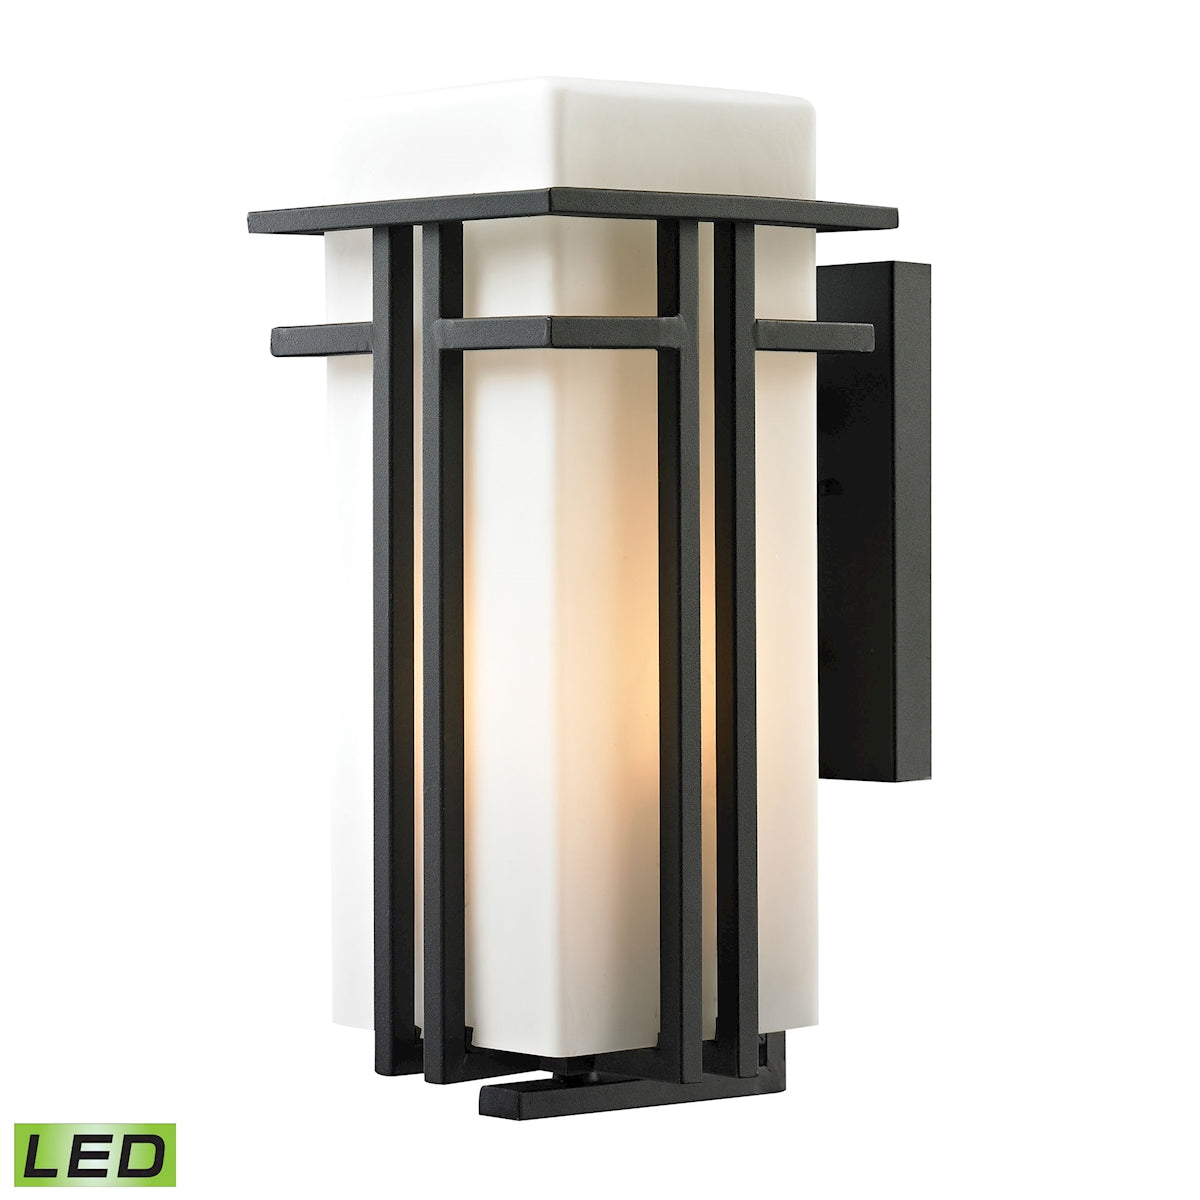 ELK Lighting 45087/1-LED Croftwell 1-Light Outdoor Wall Lamp in Textured Matte Black - Includes LED Bulb